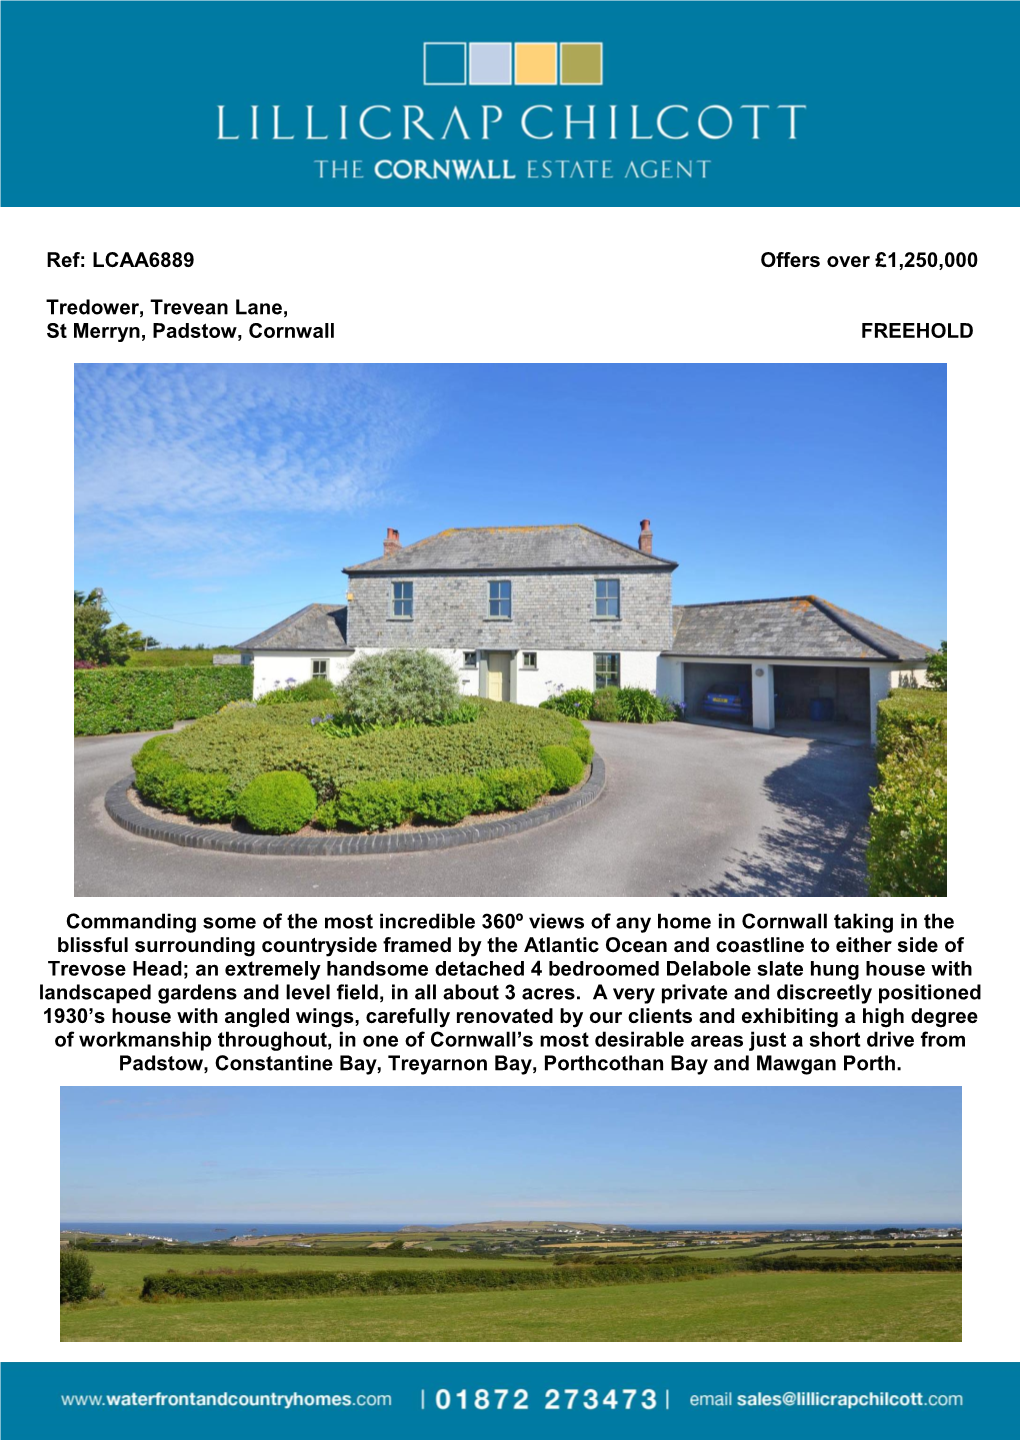 Ref: LCAA6889 Offers Over £1,250,000